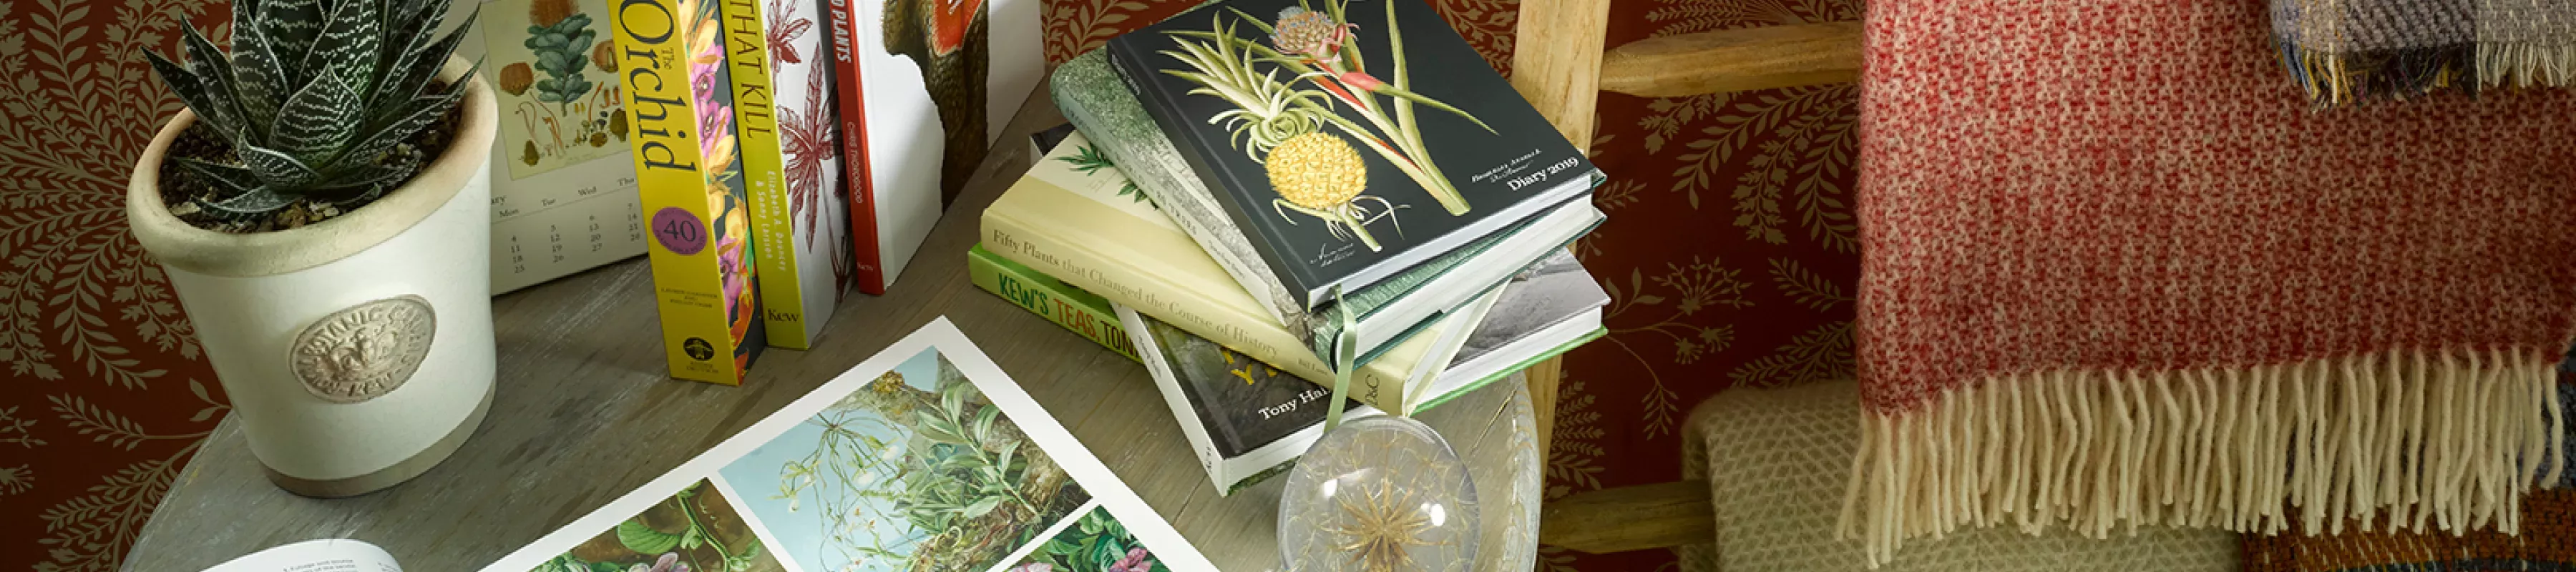 Books pulled on a coffee table along with a collection of Kew products